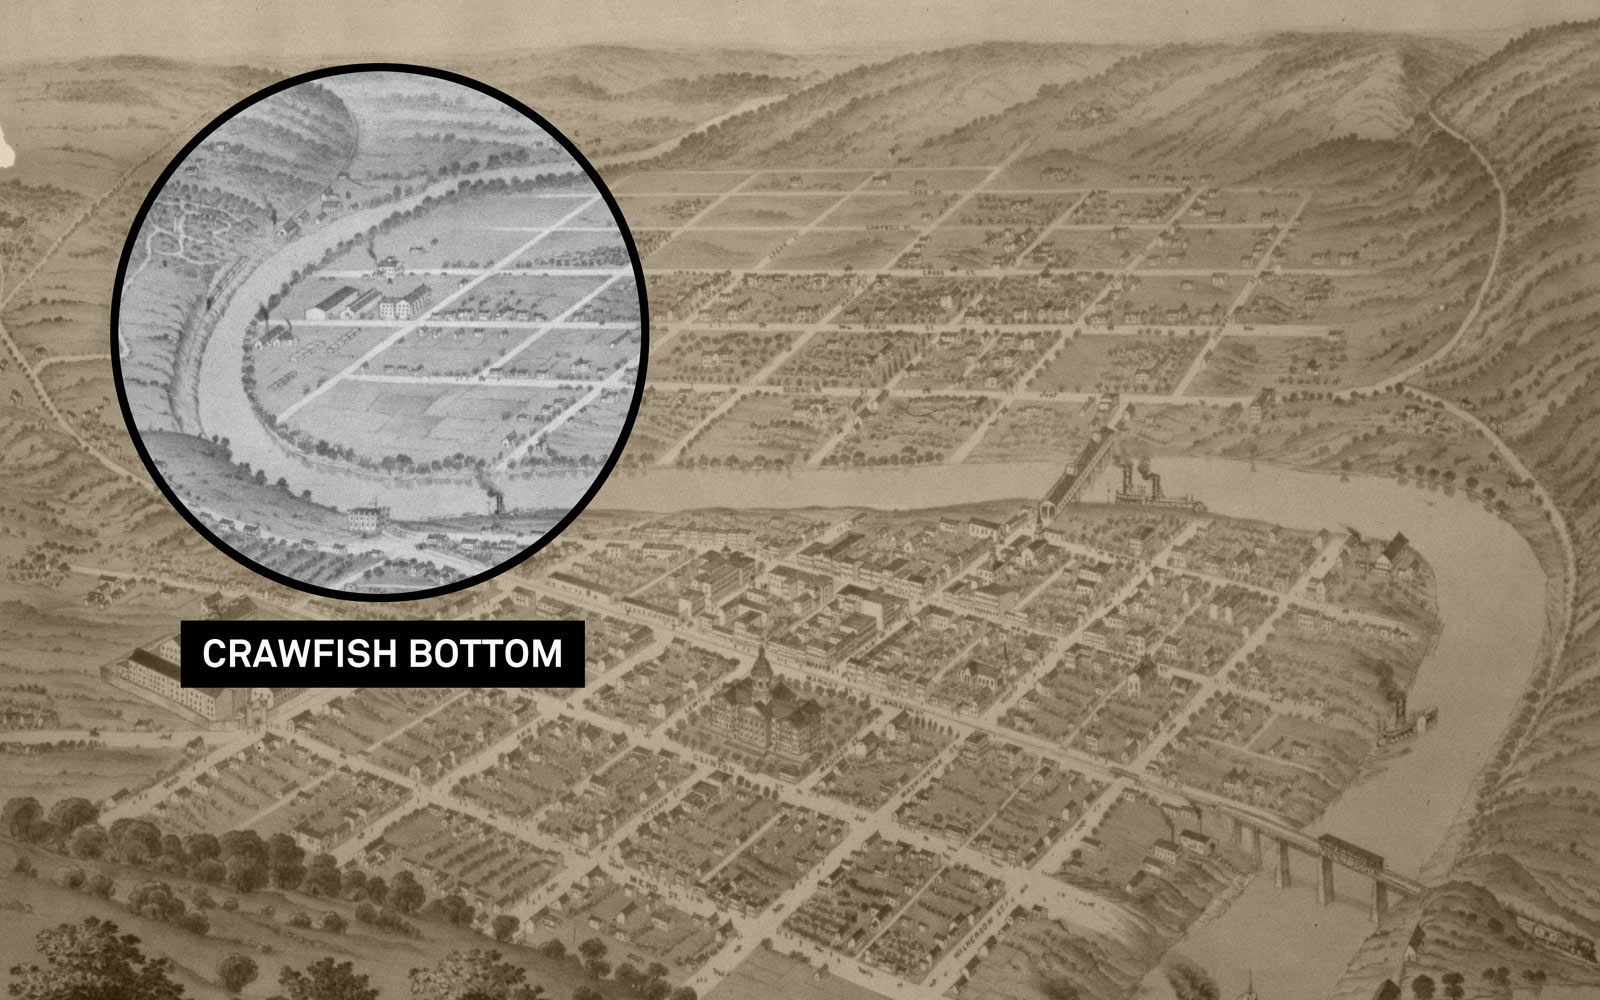 In the 1870's Frankfort newspapers began to use the nickname "Crawfish Bottom" to label what they previously called "the lower part of the city." No one can be sure where the name came from, but "Crawfish" likely stemmed from the crayfish t…